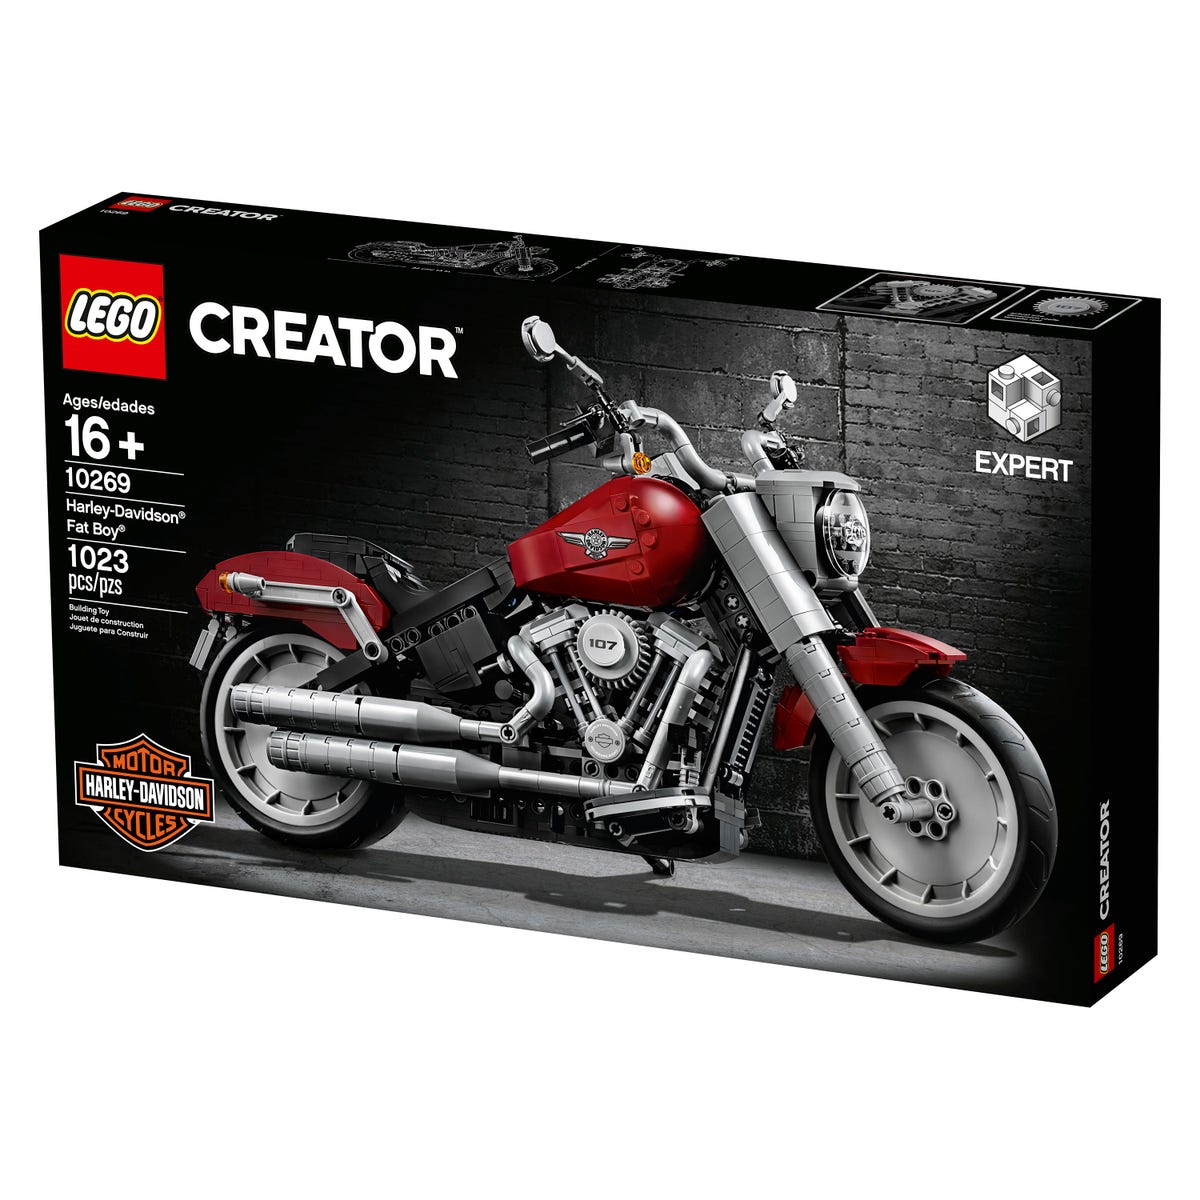 The Lego Harley-Davidson Fat Boy is one of its most realistic sets